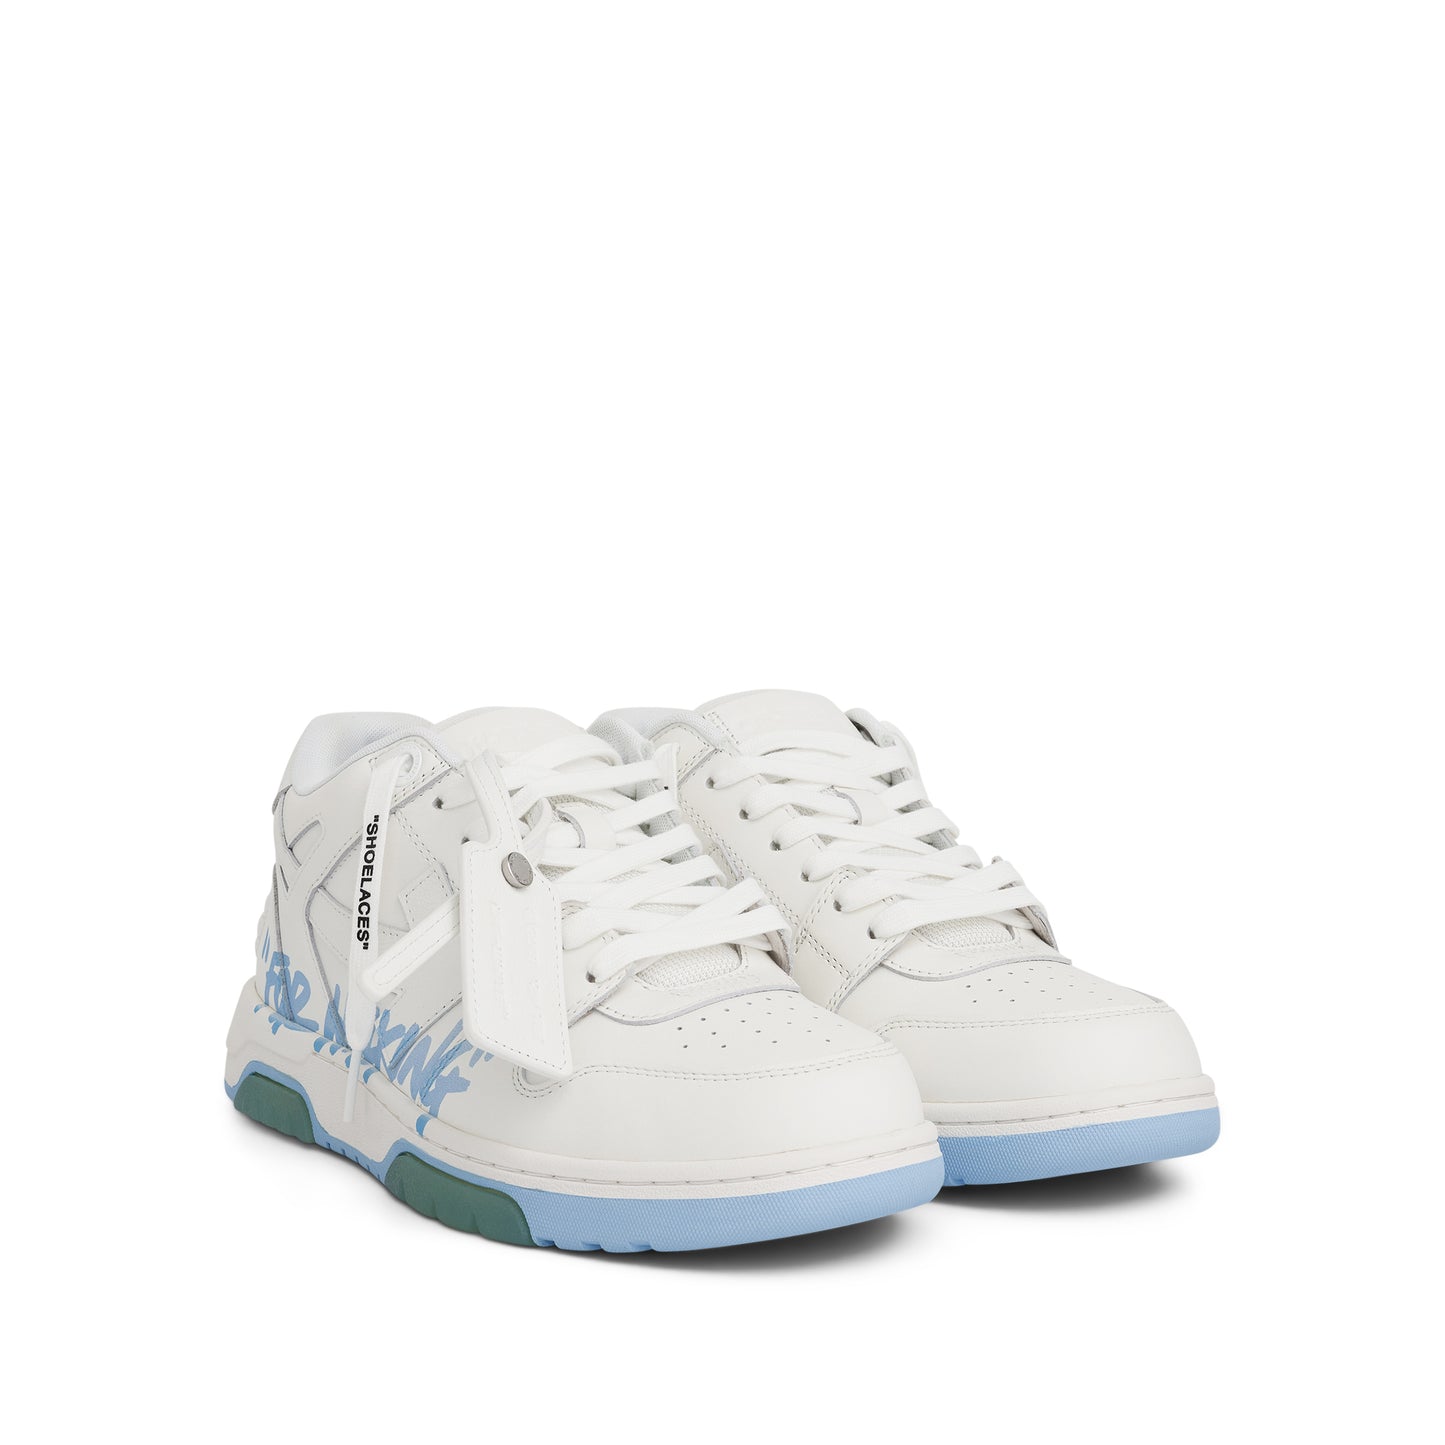 Out Of Office 'For Walking' Sneaker in White/Light Blue